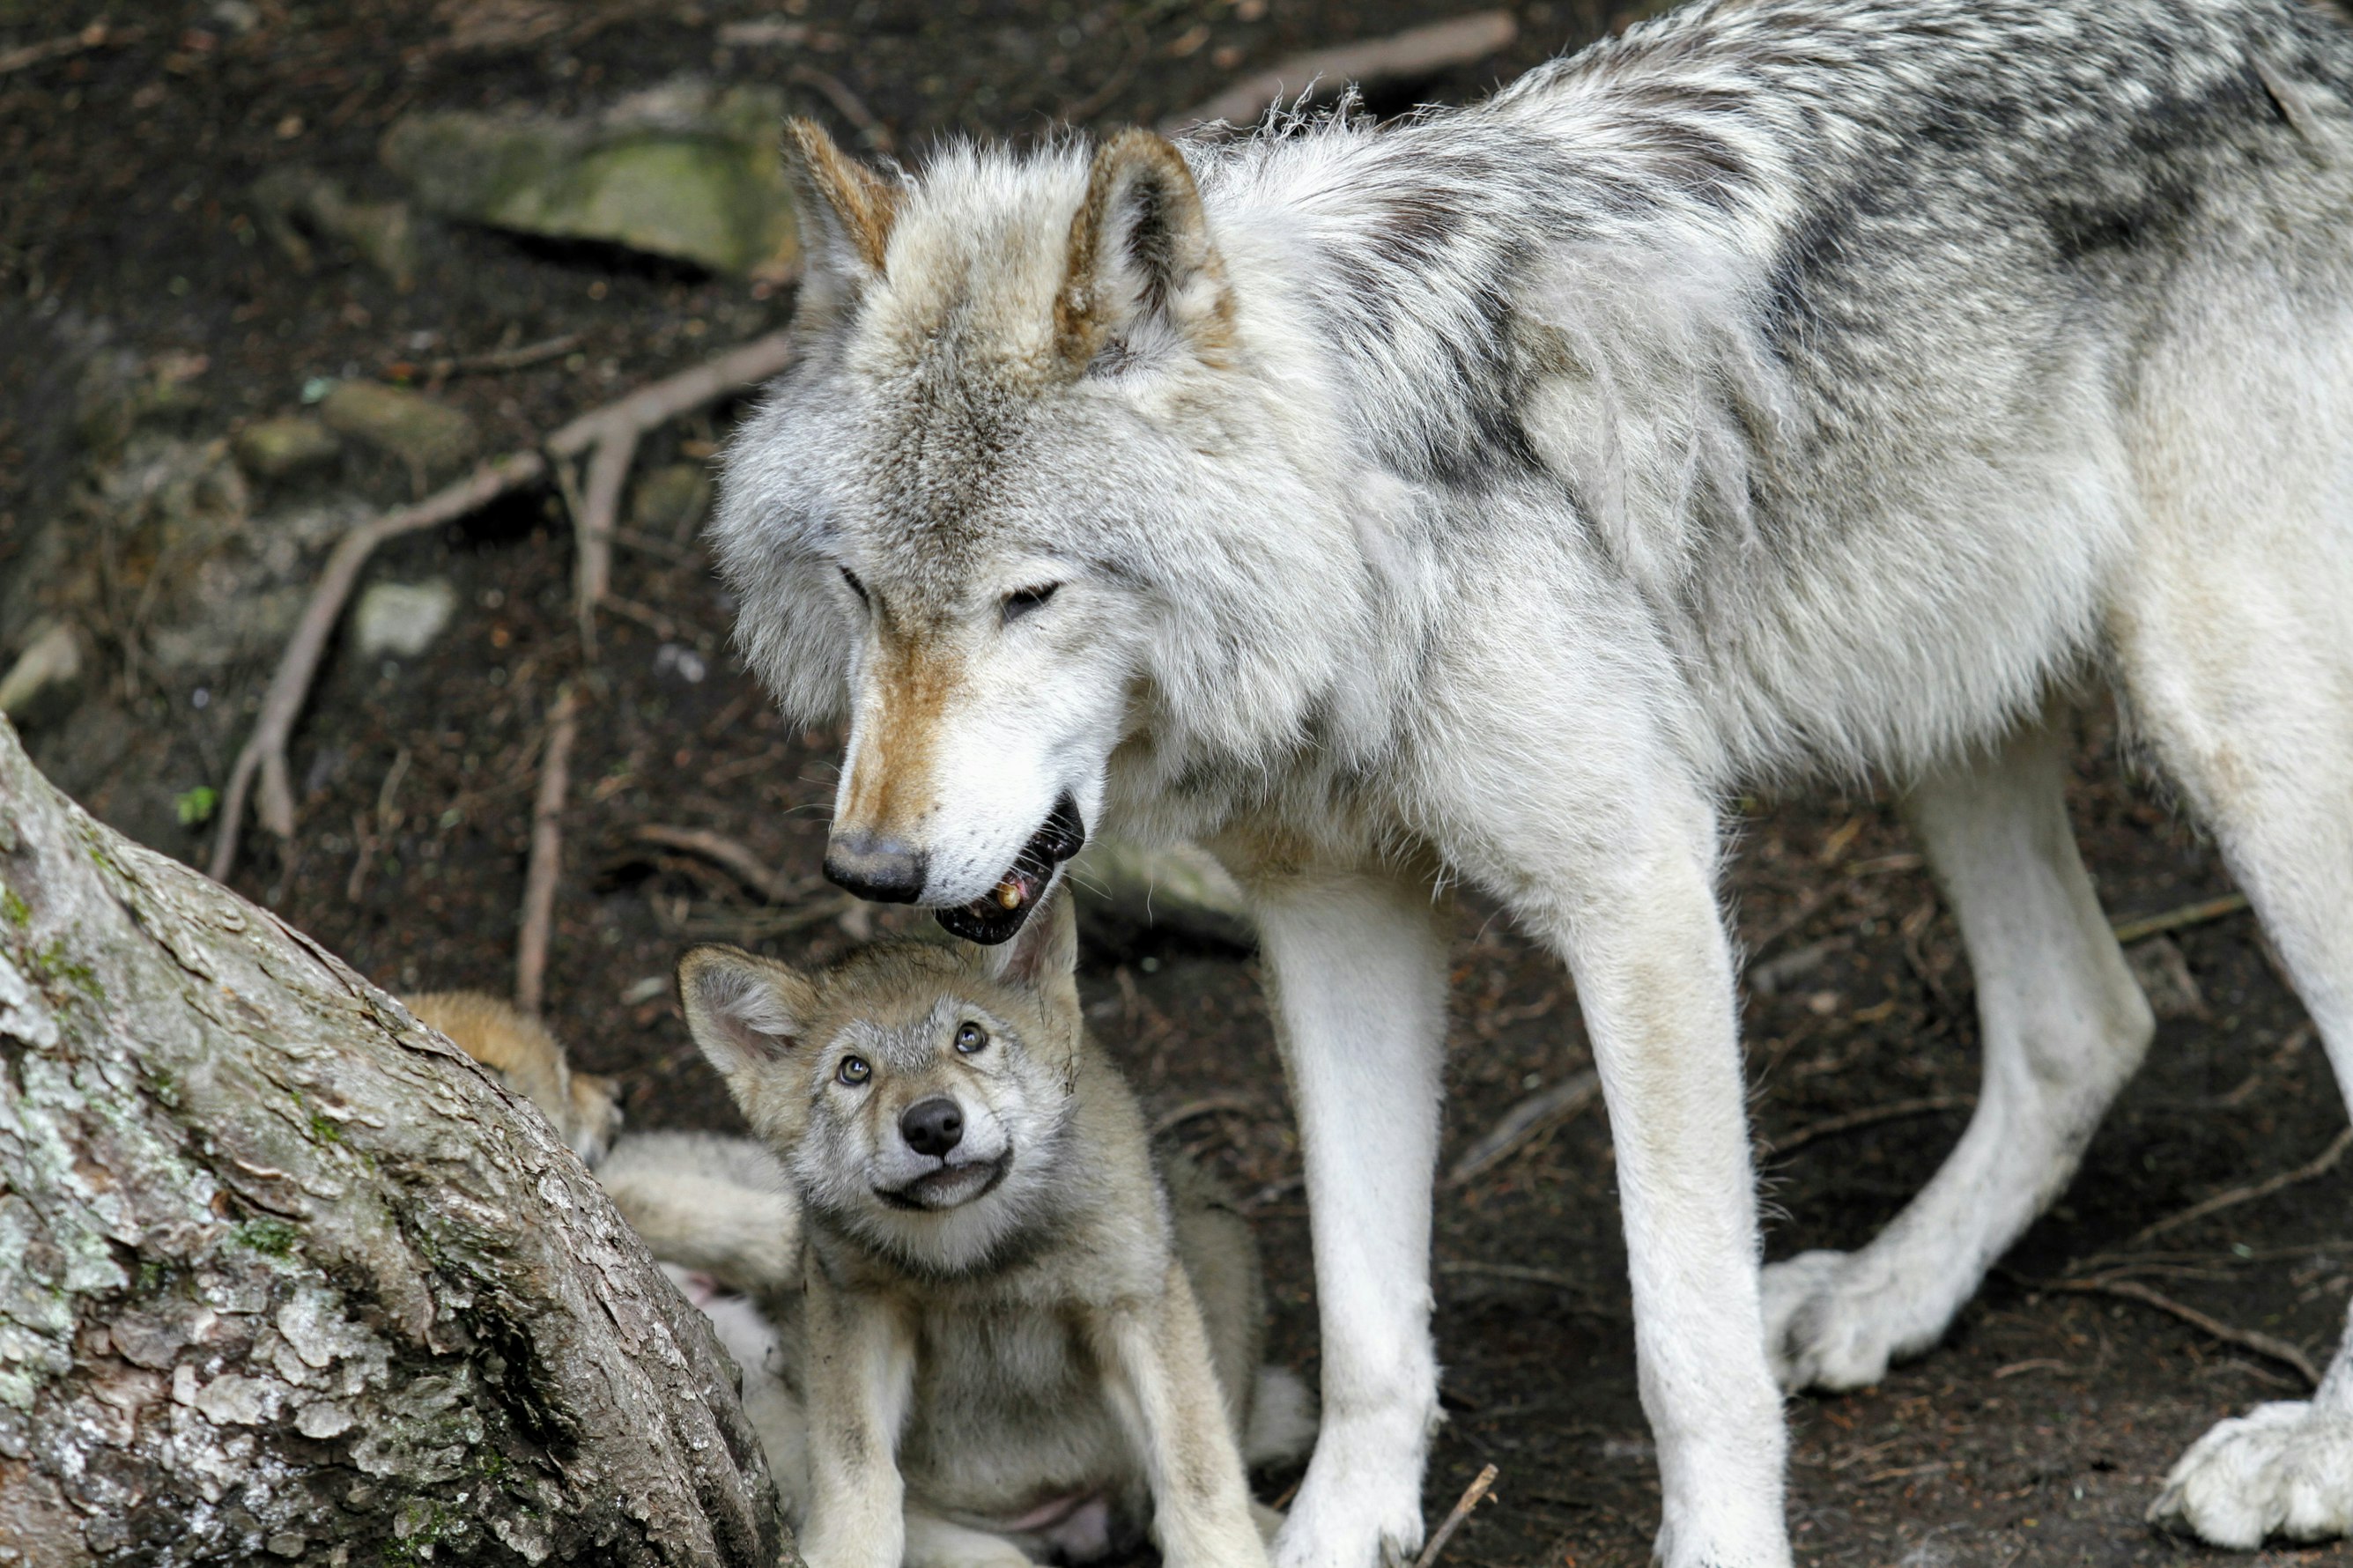 Judge Restores Protections for Gray Wolves Across Much of US